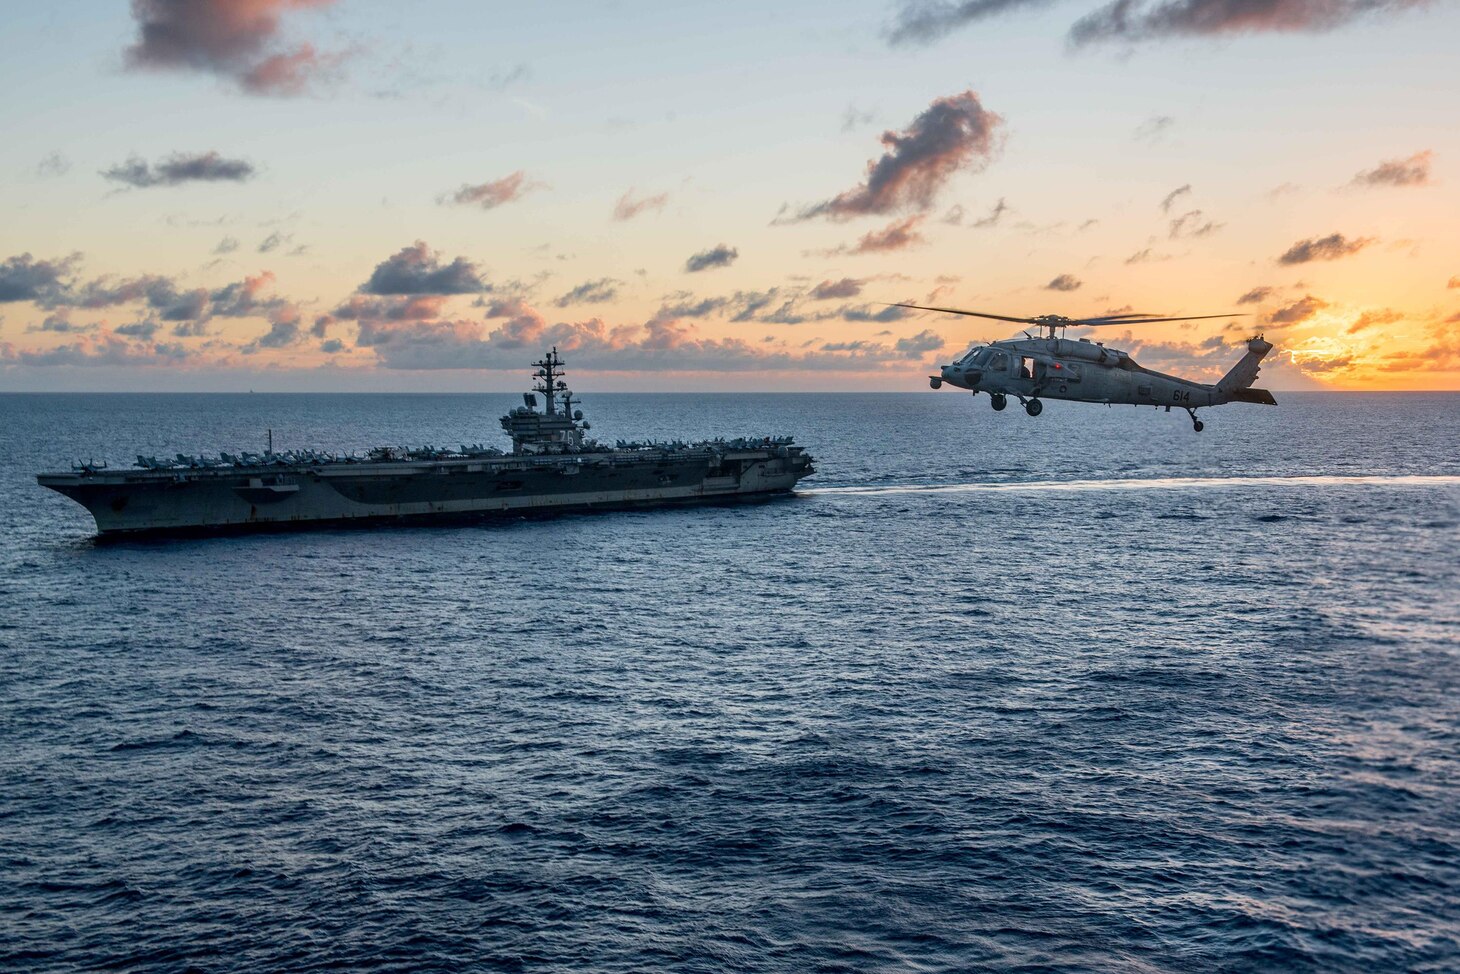 PHILIPPINE SEA (Oct. 7, 2016) - An MH-60S Sea Hawk, assigned to the "Golden Falcons" of Helicopter Sea Combat Squadron (HSC) 12, flies near the Navy's only forward-deployed aircraft carrier, USS Ronald Reagan (CVN 76), following helicopter search-and-rescue training. This training enables real-world proficiency in open-ocean rescue procedure and equipment. Ronald Reagan, the Carrier Strike Group Five (CSG 5) flagship, is on patrol supporting security and stability in the Indo-Asia-Pacific region.